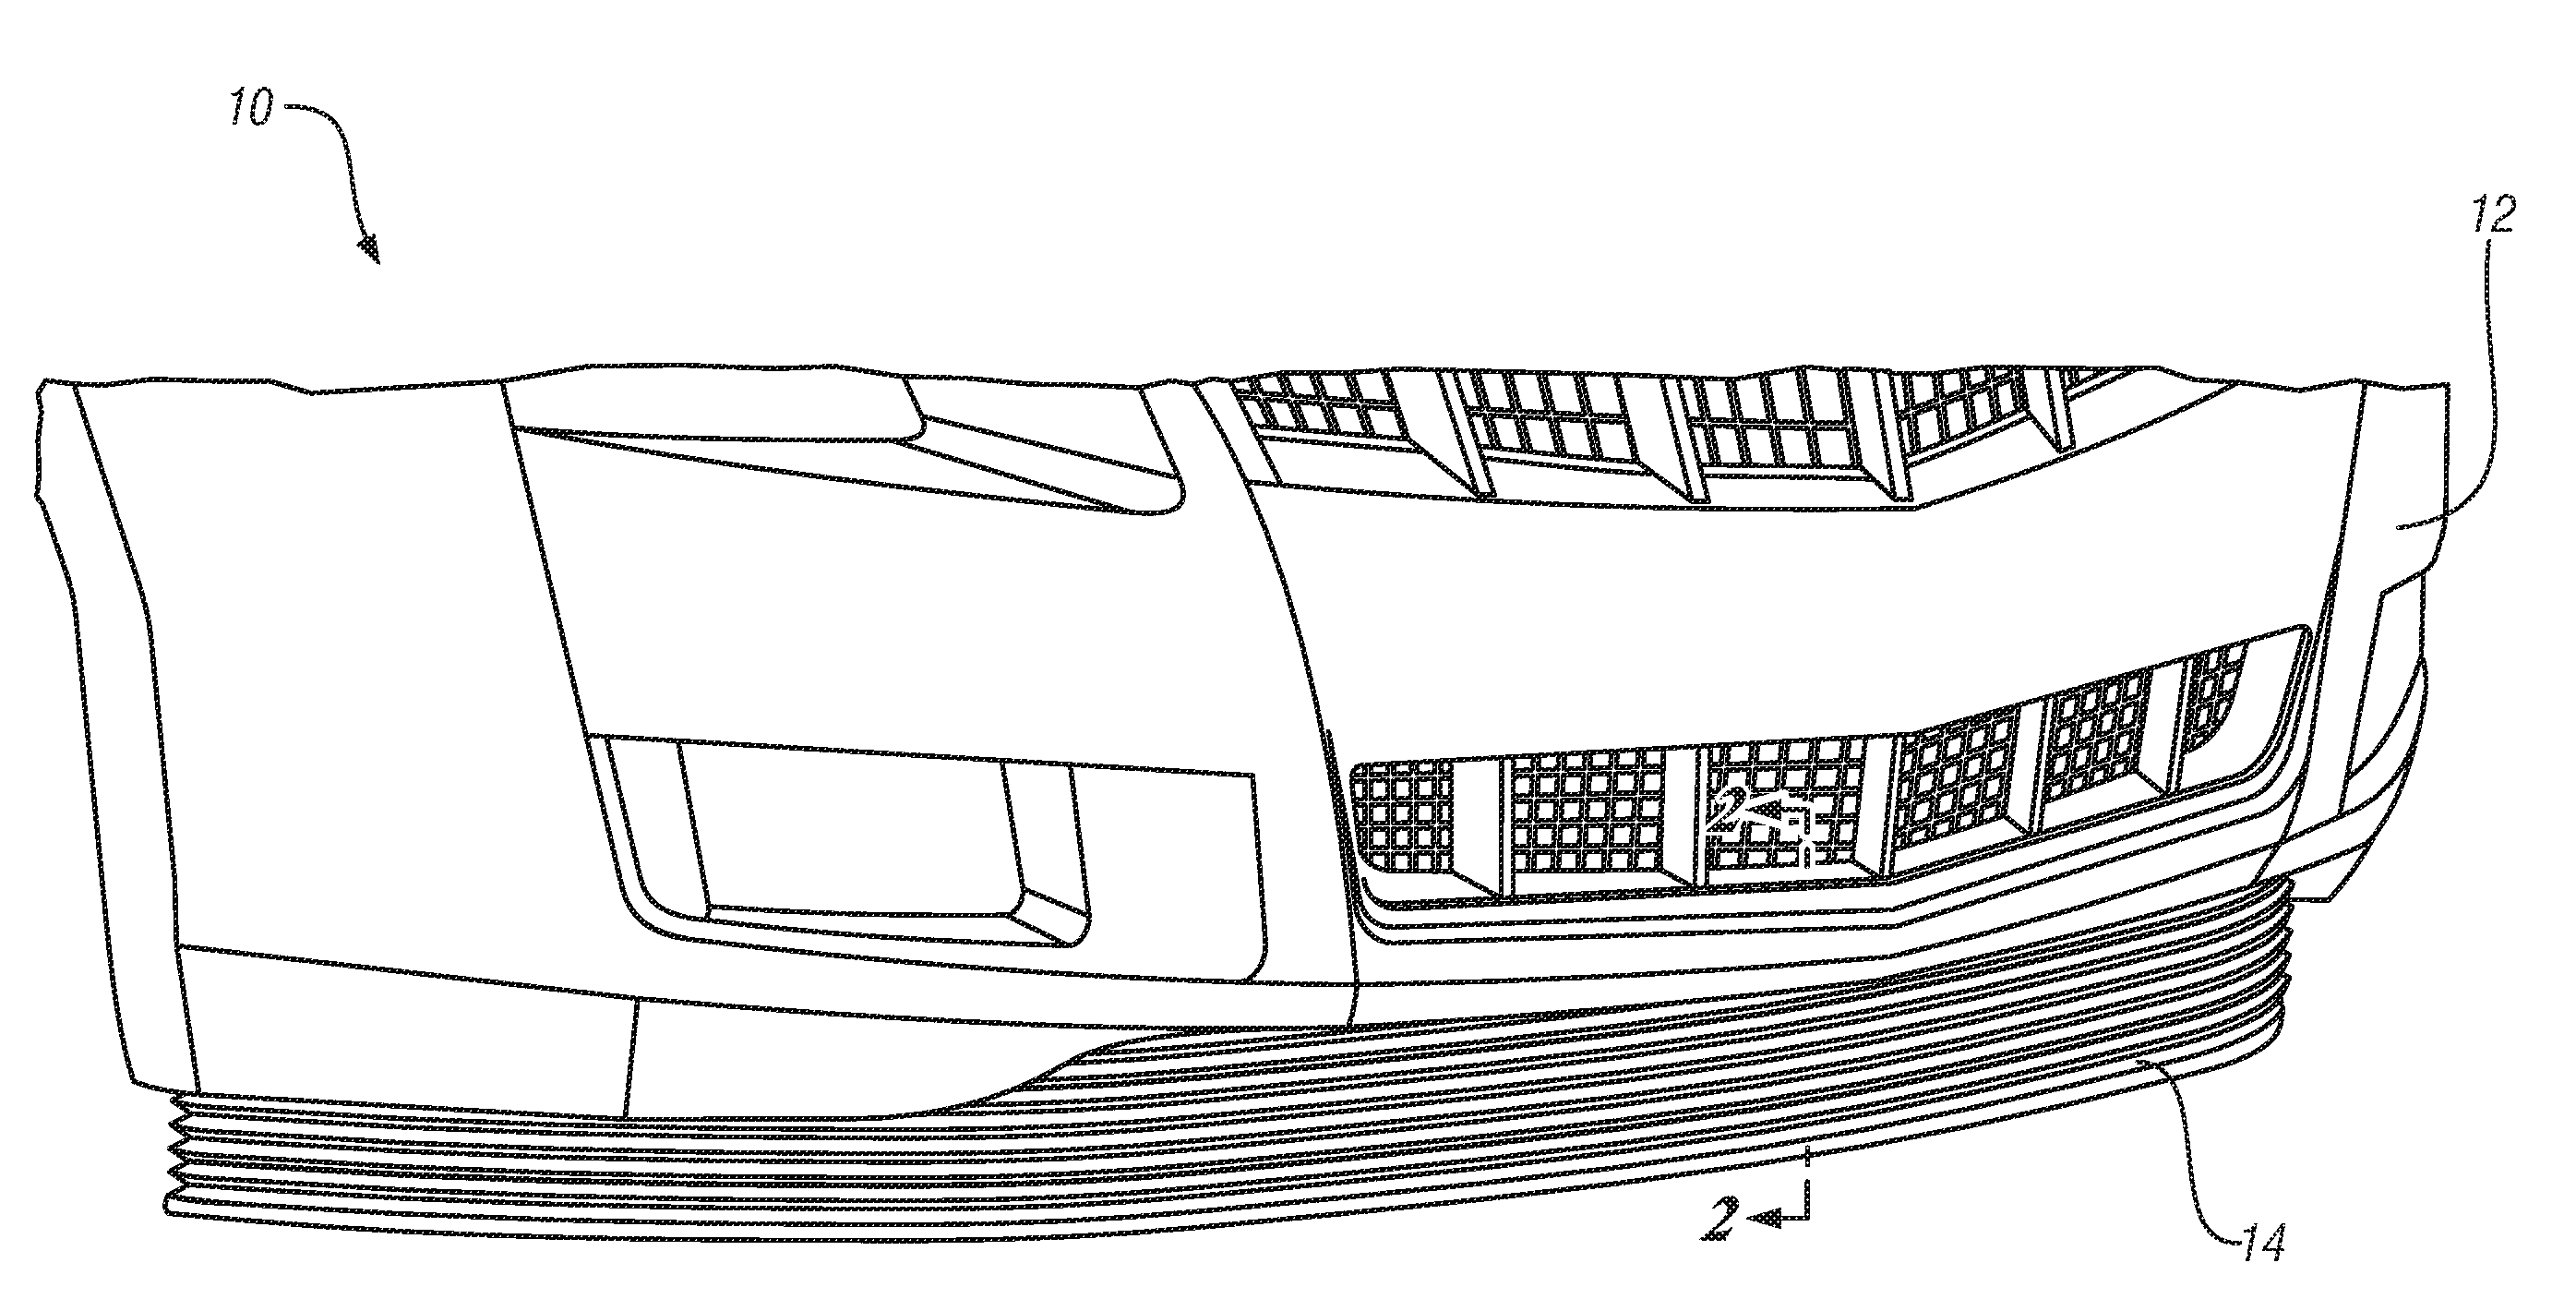 Extendable air control dam for vehicle